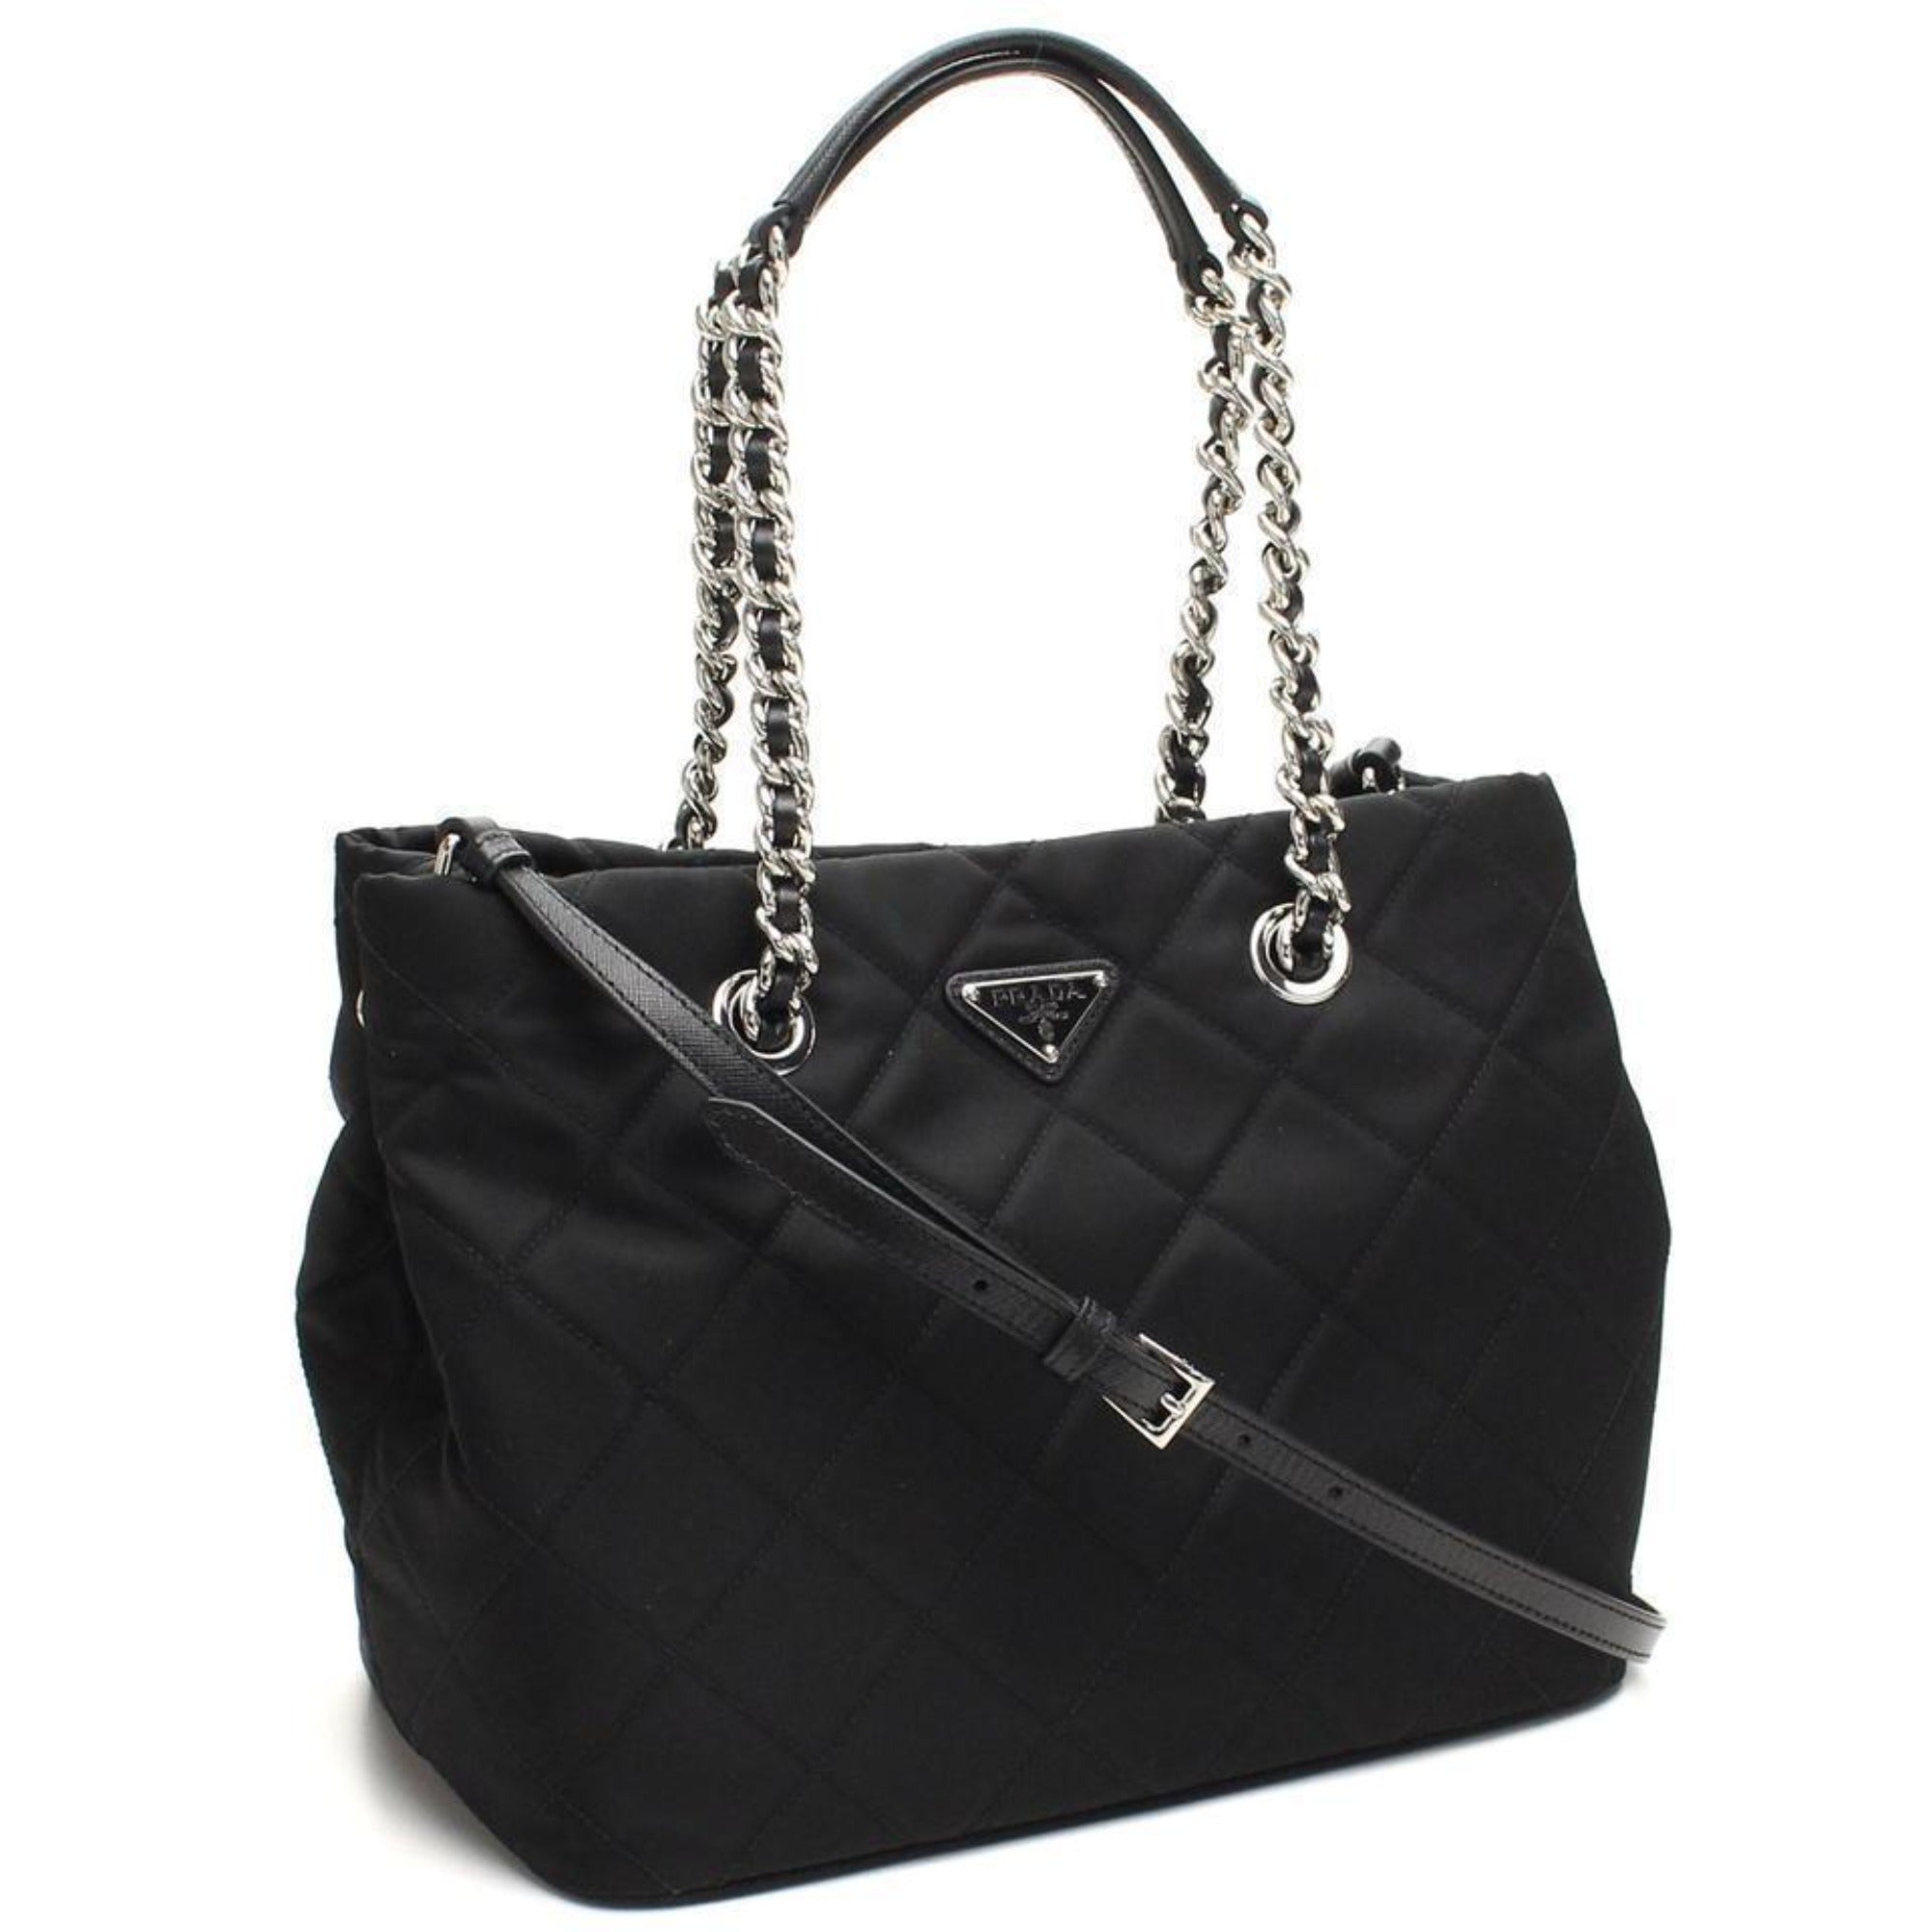 Prada Women's Black Quilted Tessuto Chain Shoulder Bag Tote 1BG740 at_Queen_Bee_of_Beverly_Hills